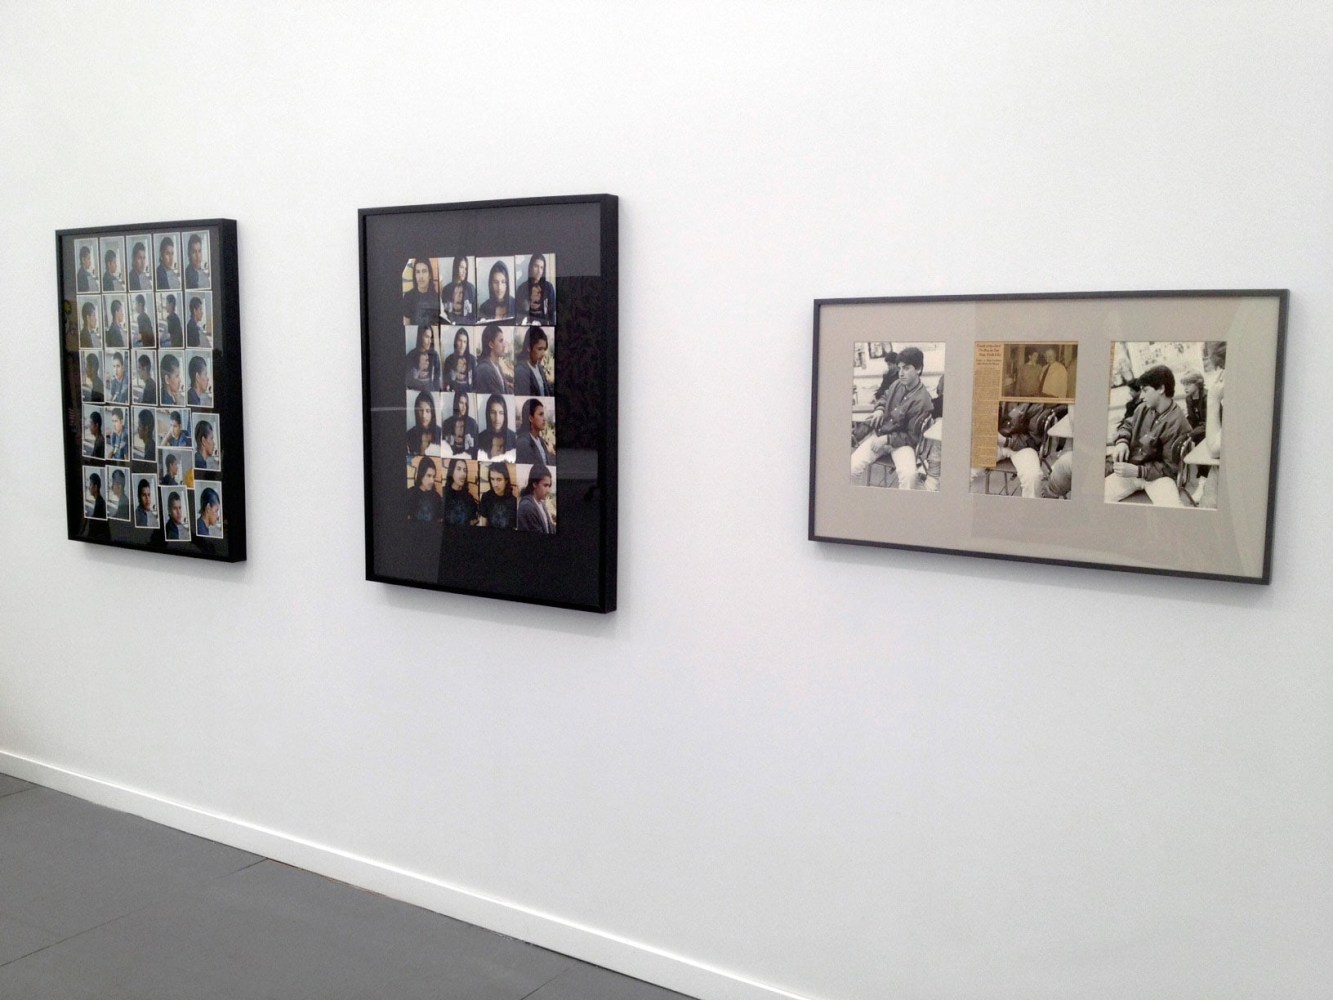 Luhring Augustine

Frieze New York

Installation view

May 9-12, 2014

(Pictured: Larry Clark)&amp;nbsp;